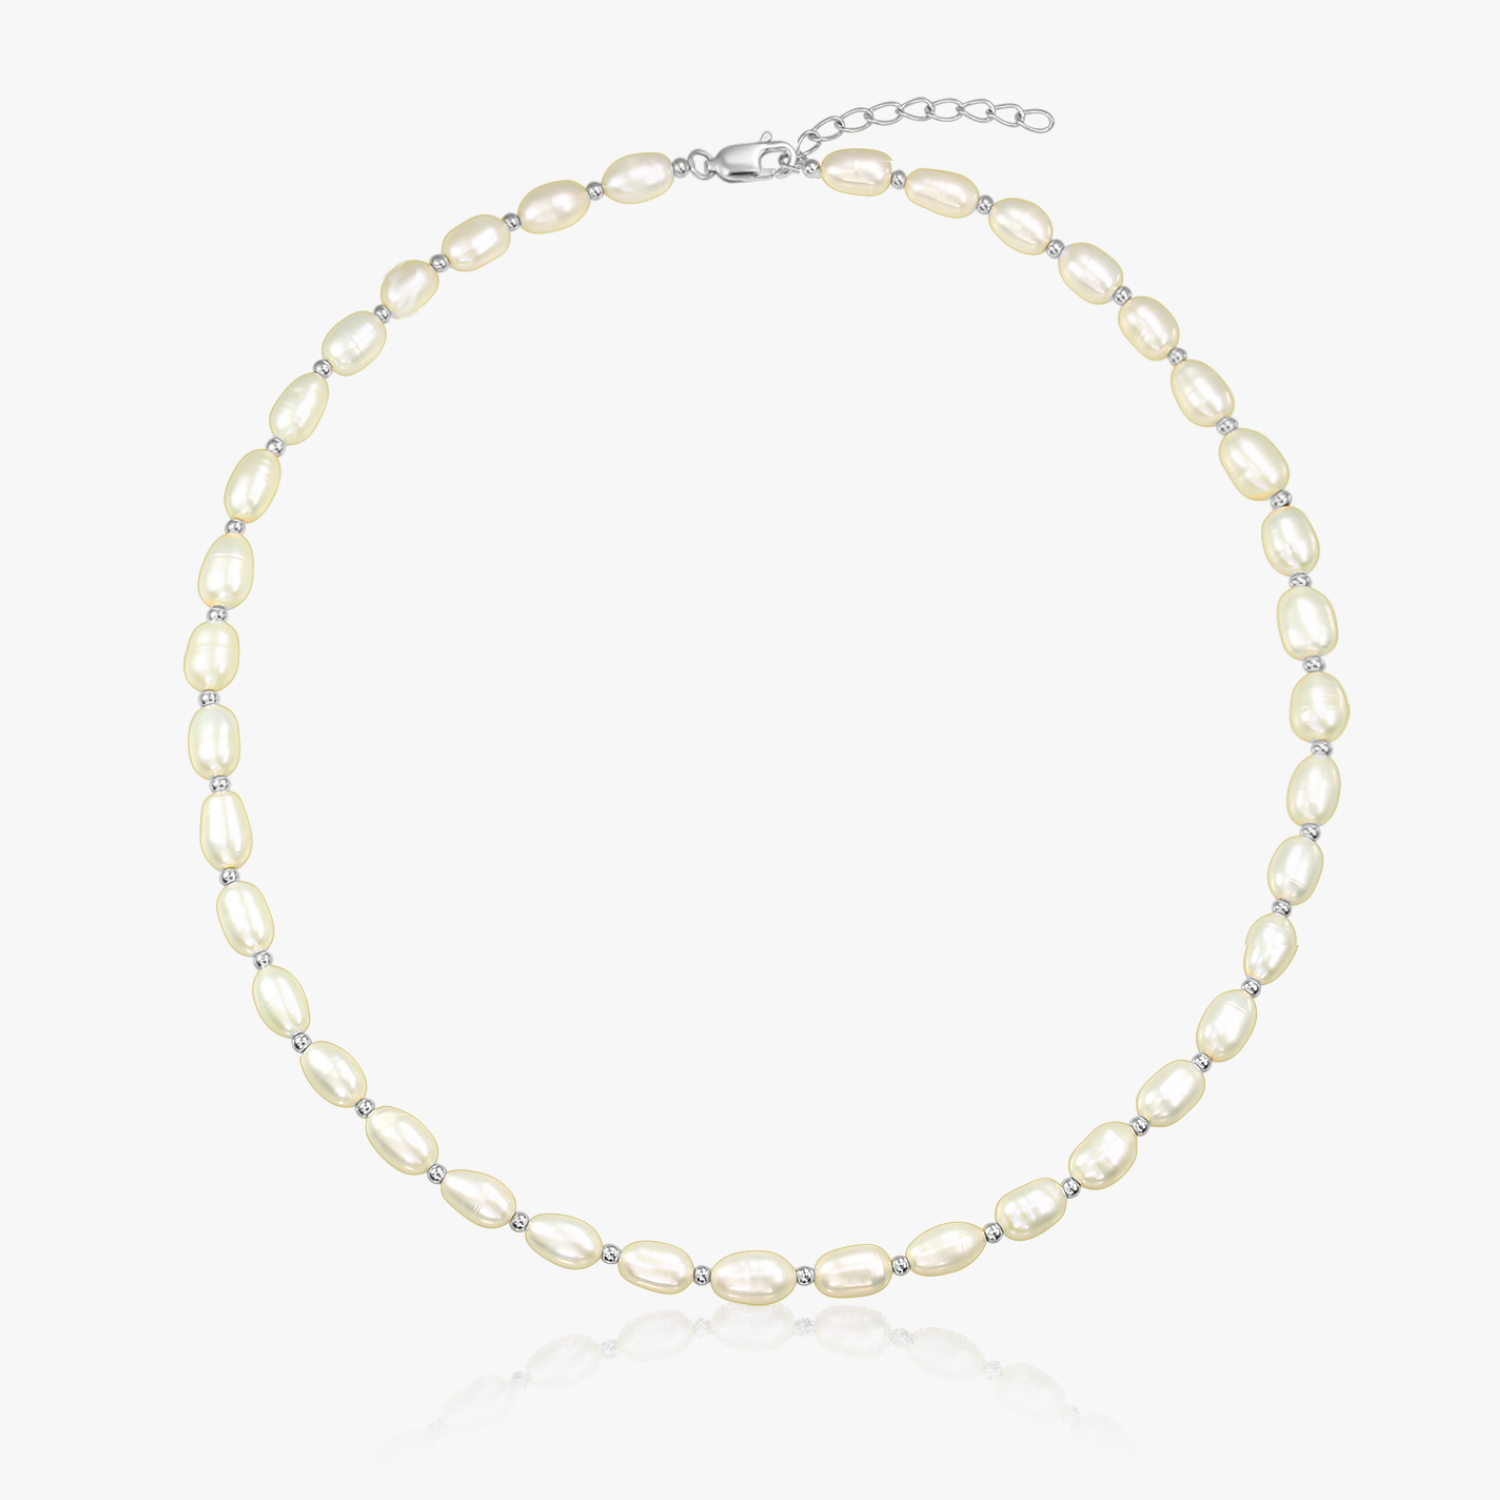 Chérie silver necklace - Natural pearls